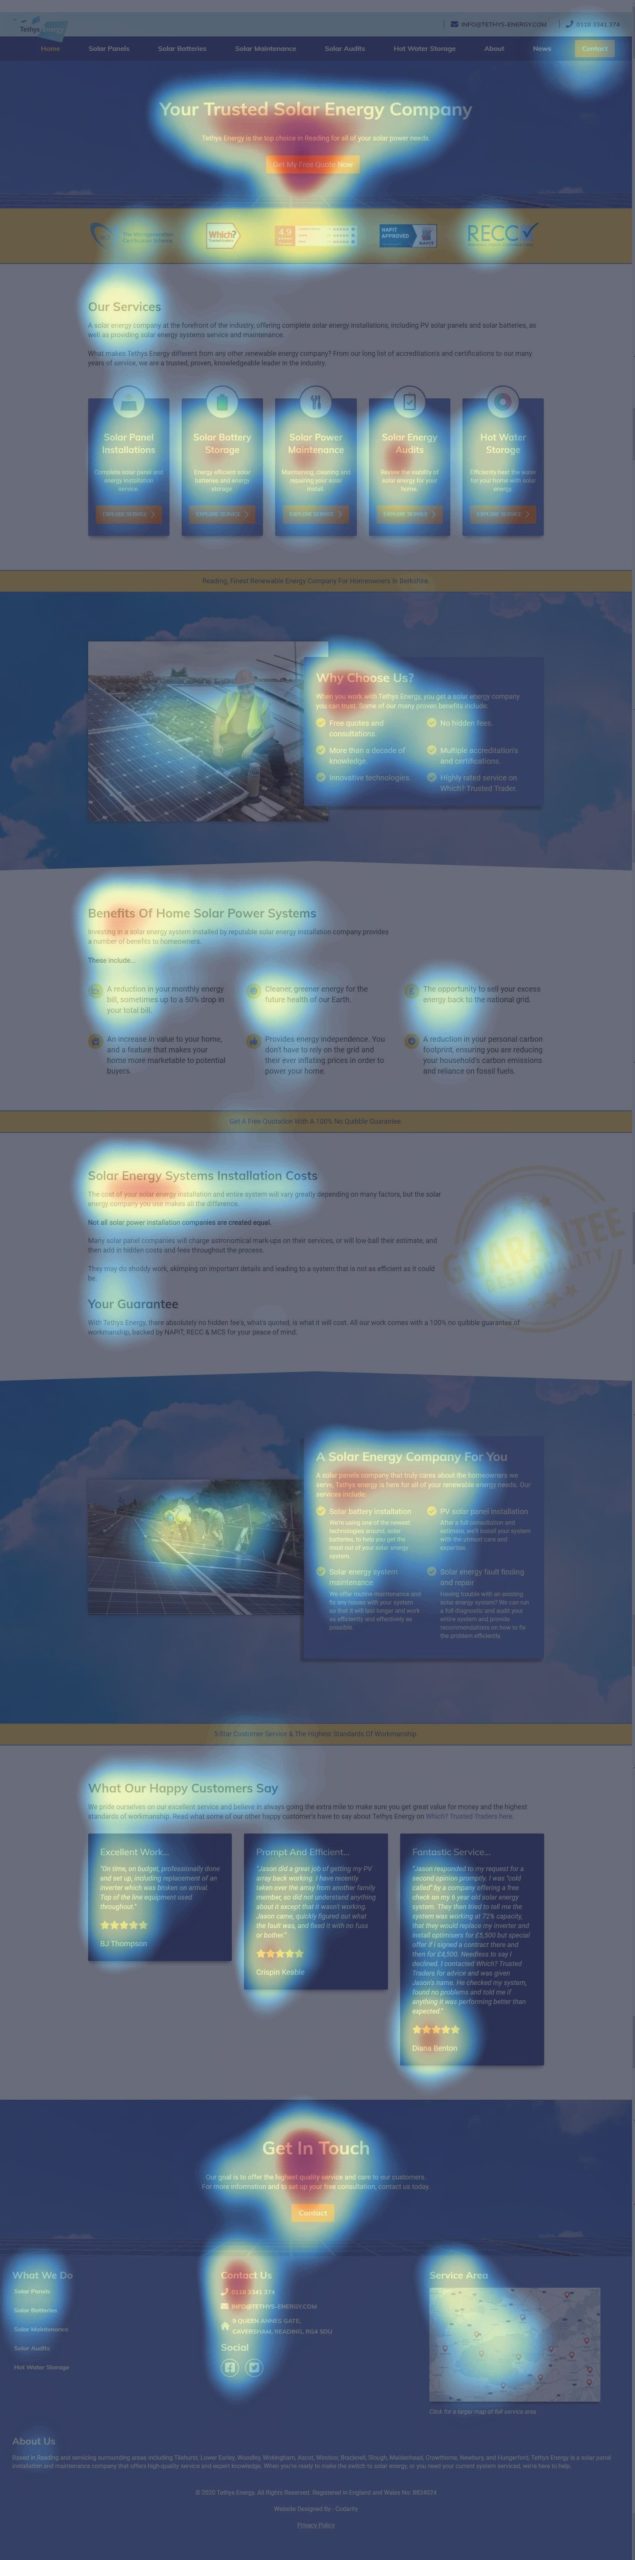 AFTER - Tethys NEW Web Design - Heatmap - Attention Mapping